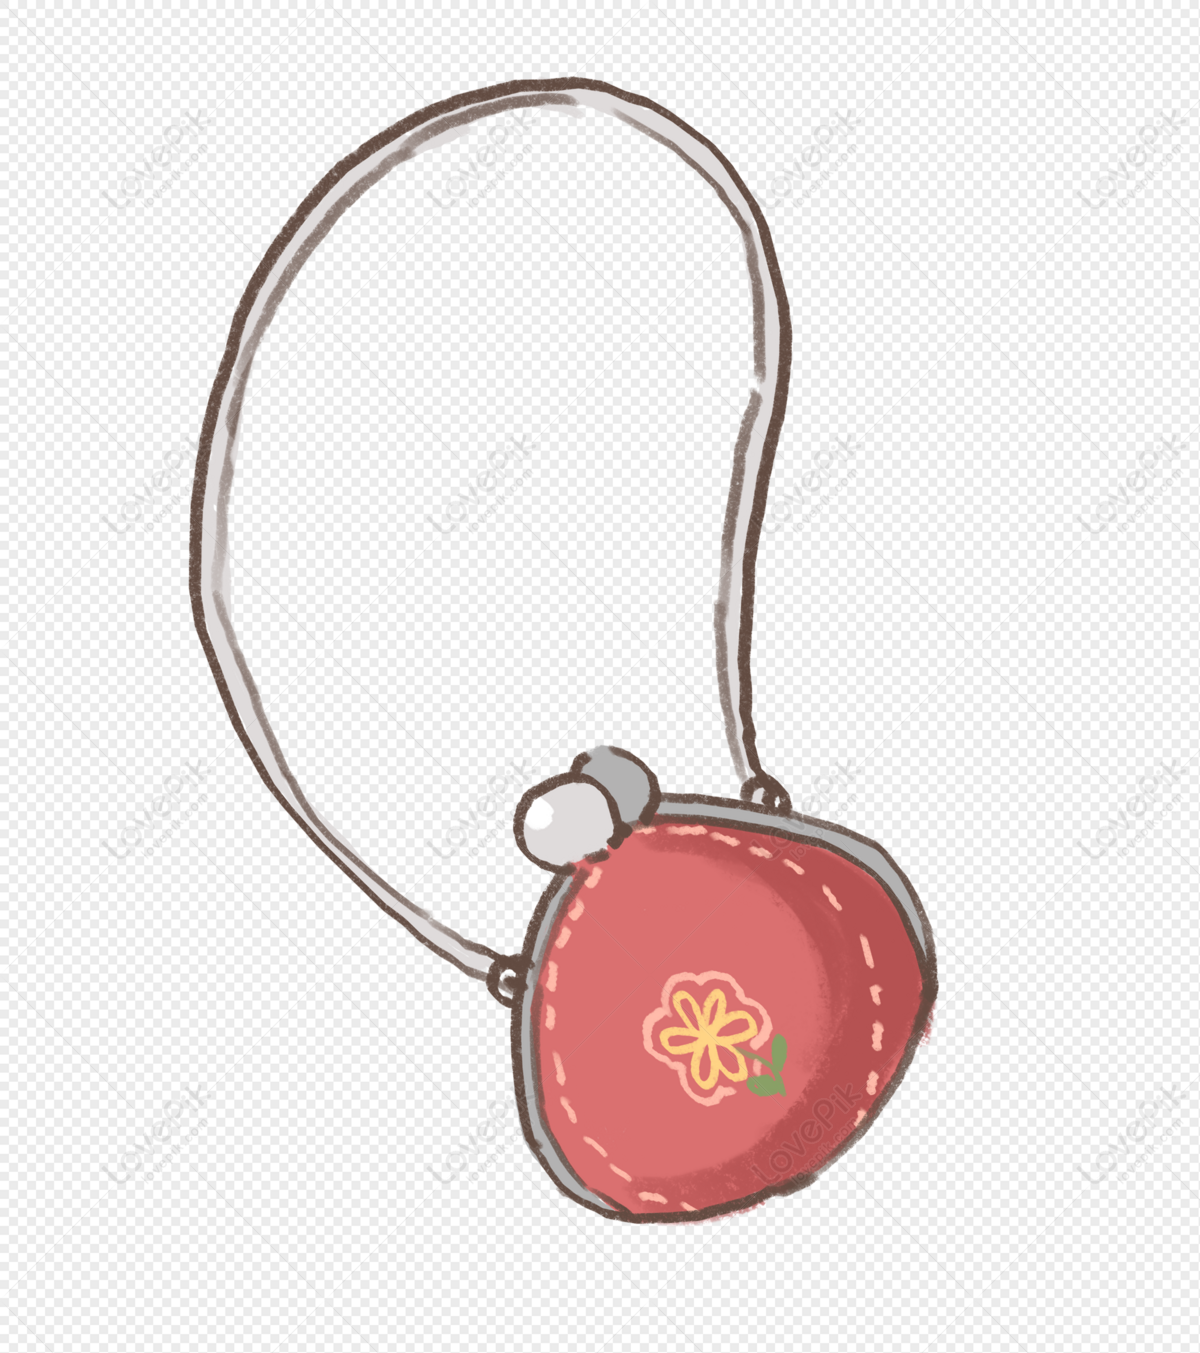 Vintage Change Purse Change Object, Purse, Isolated, Object PNG Transparent  Image and Clipart for Free Download